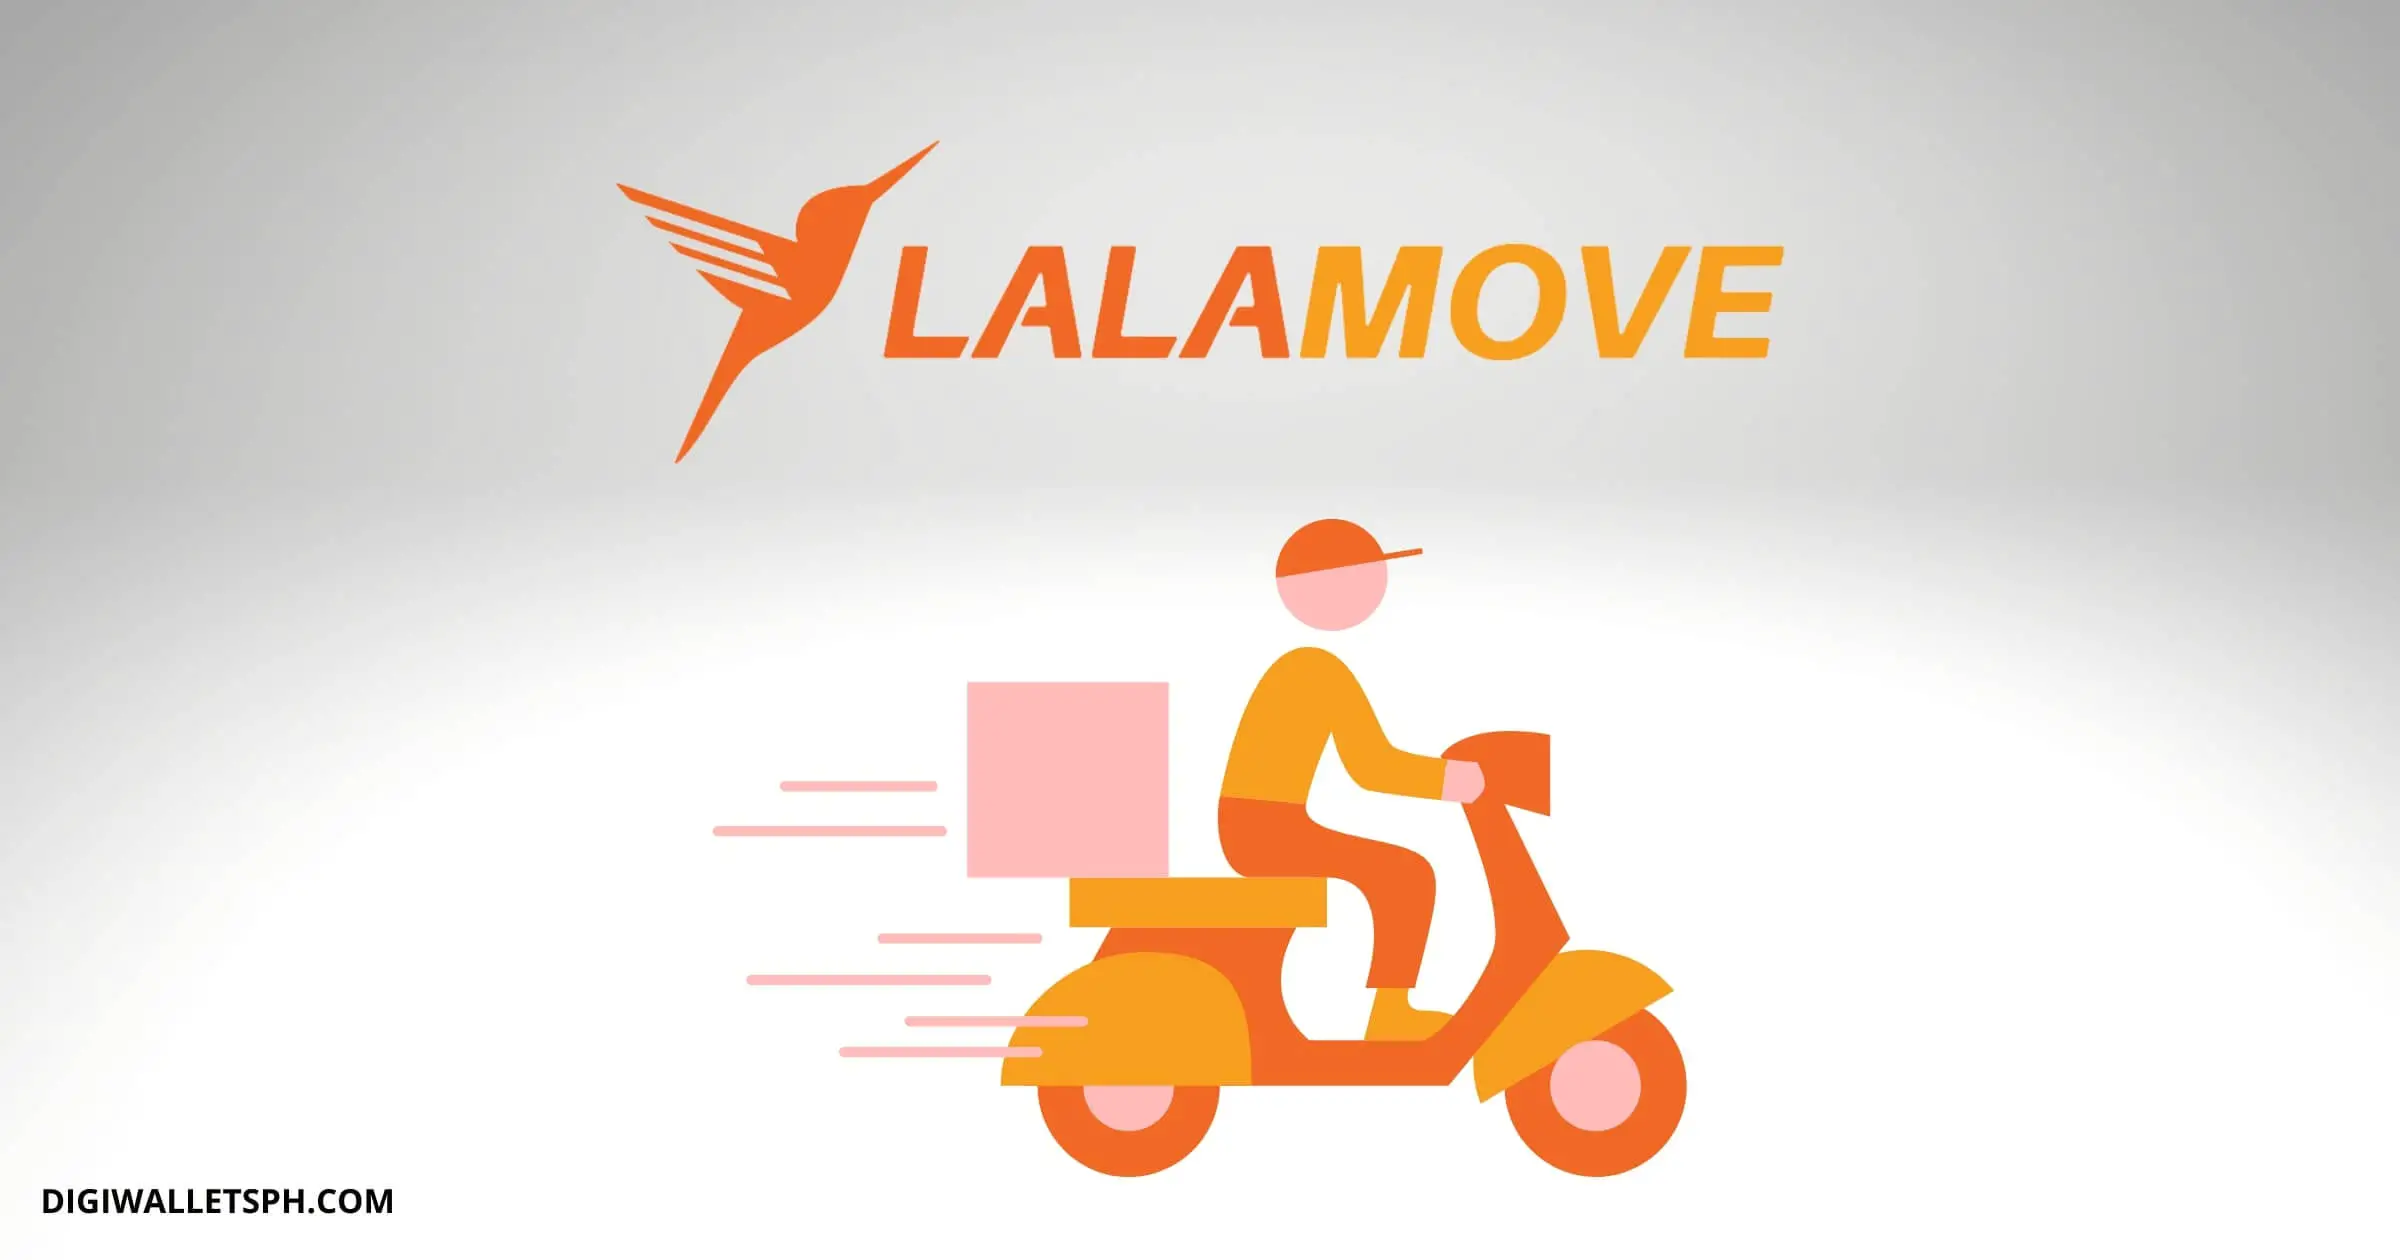 How to apply Lalamove rider